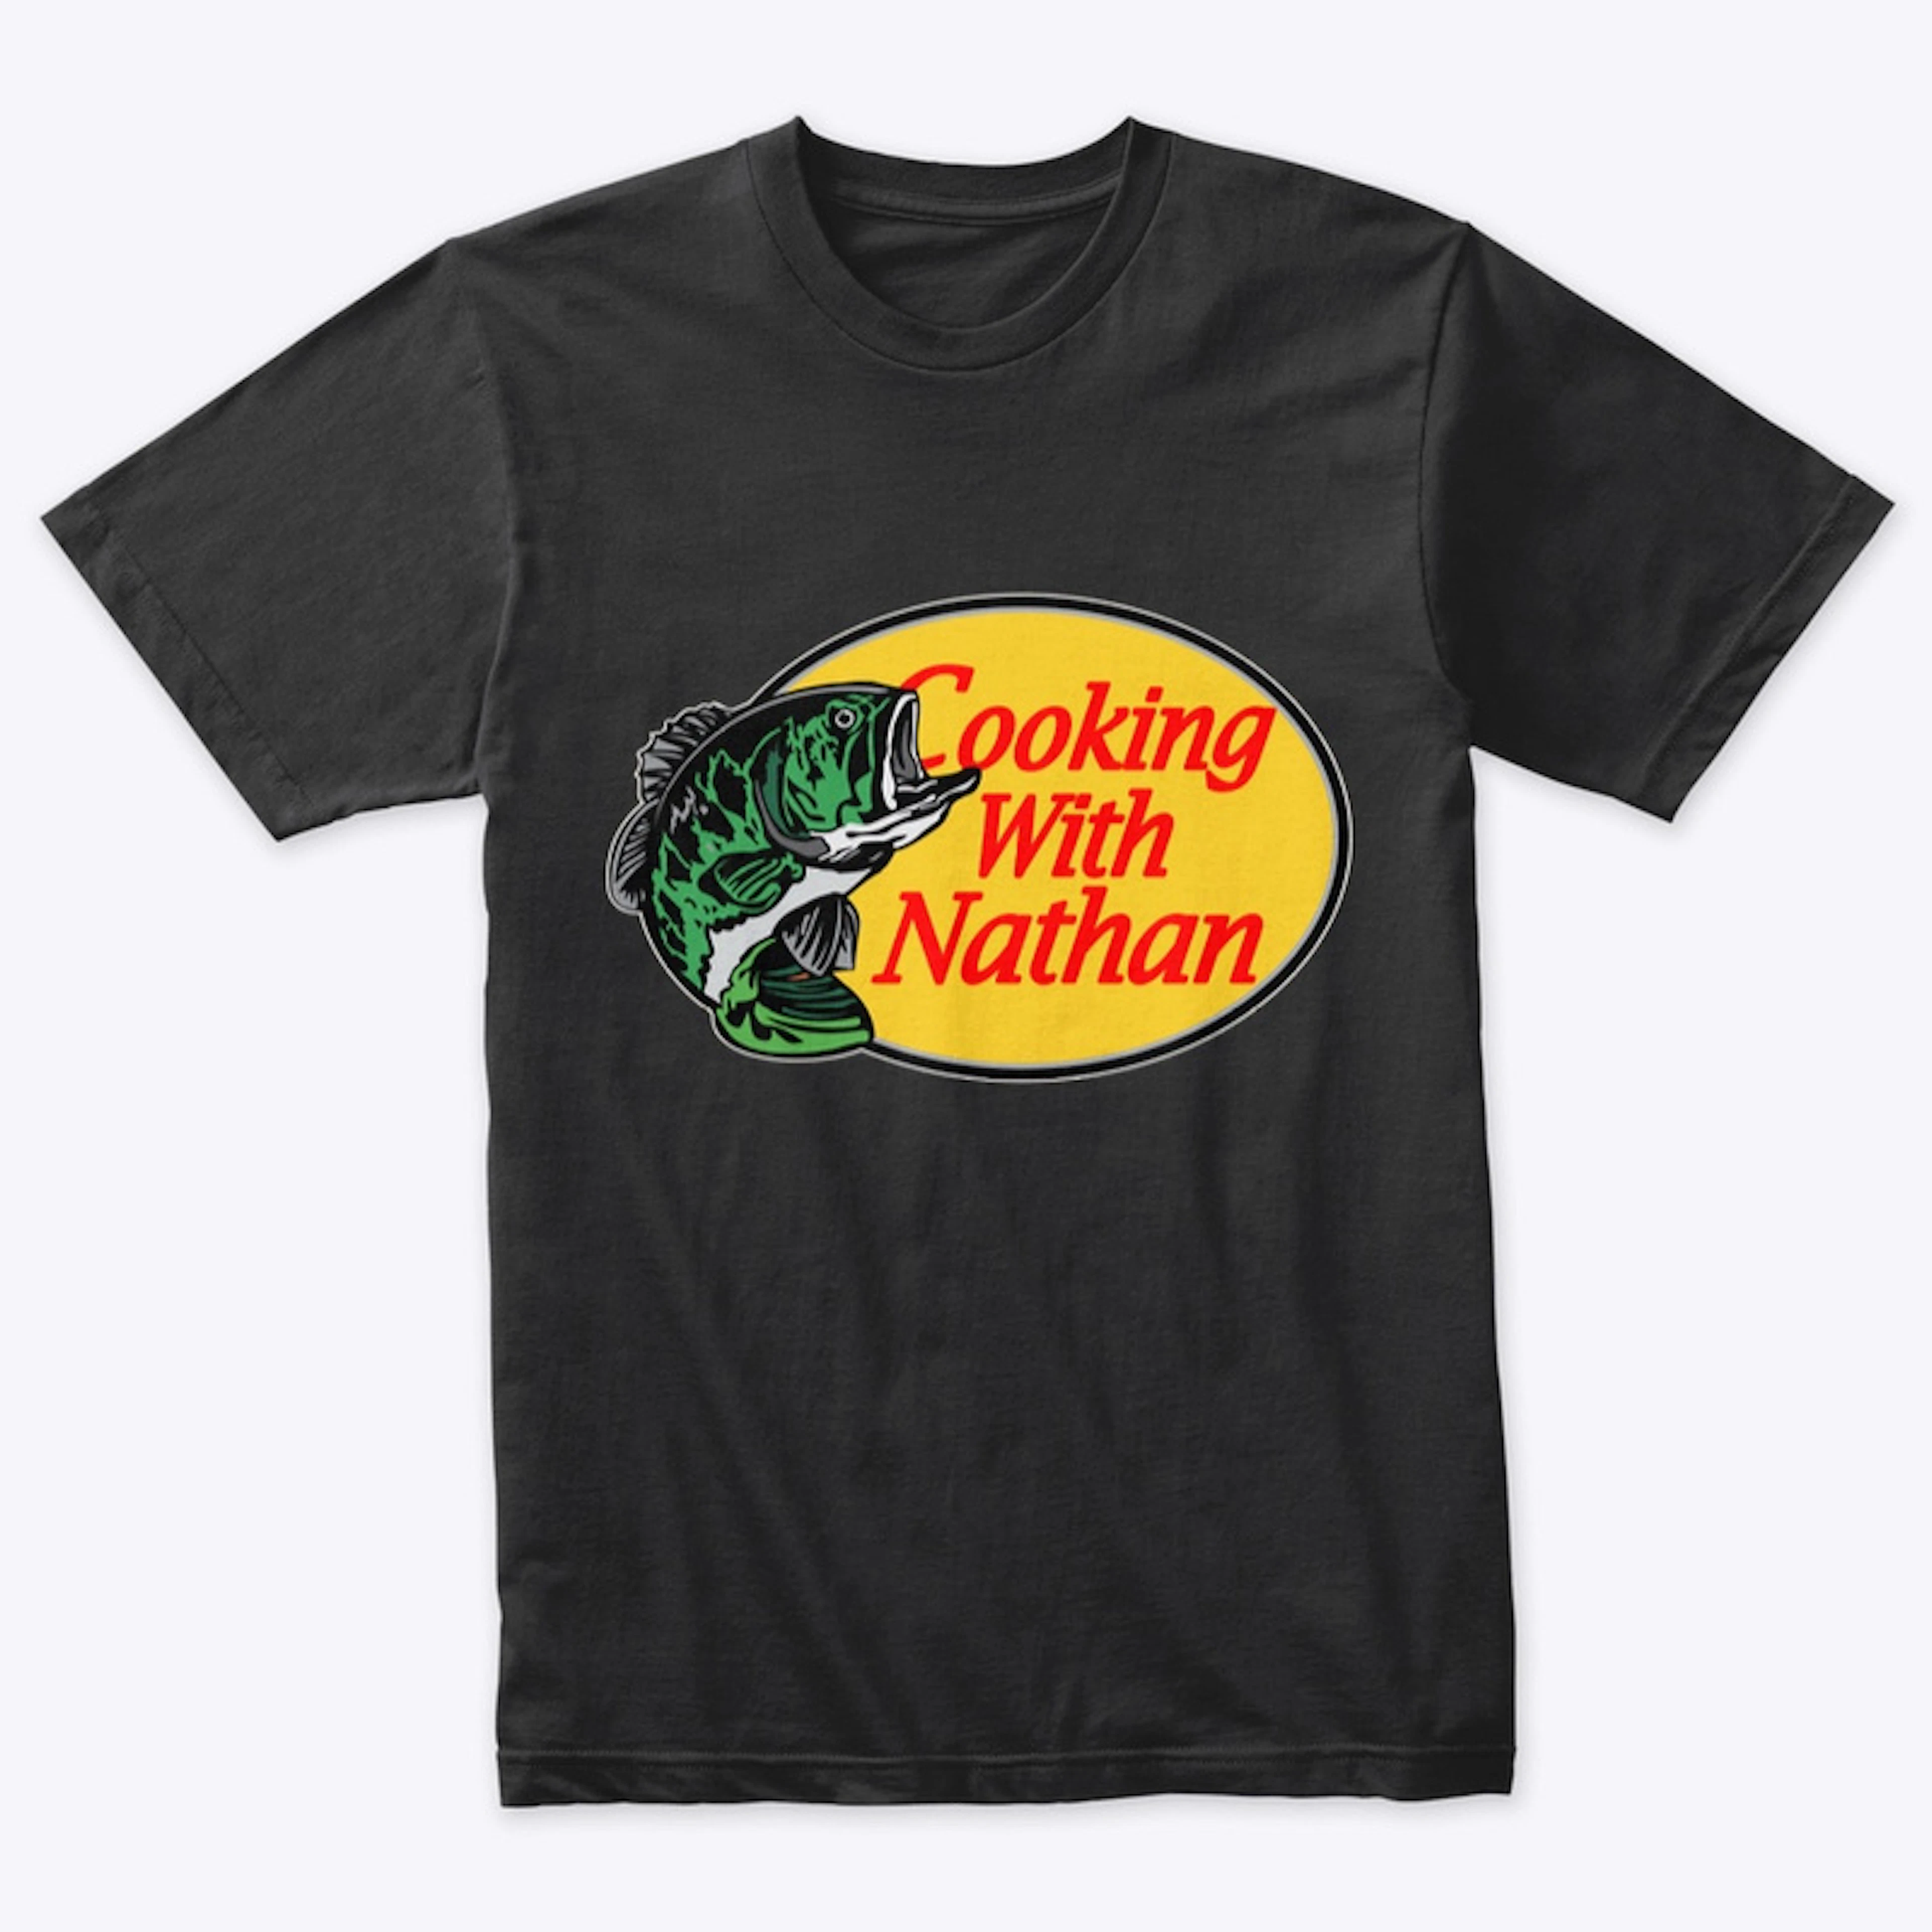 Fish themed Cooking with Nathan